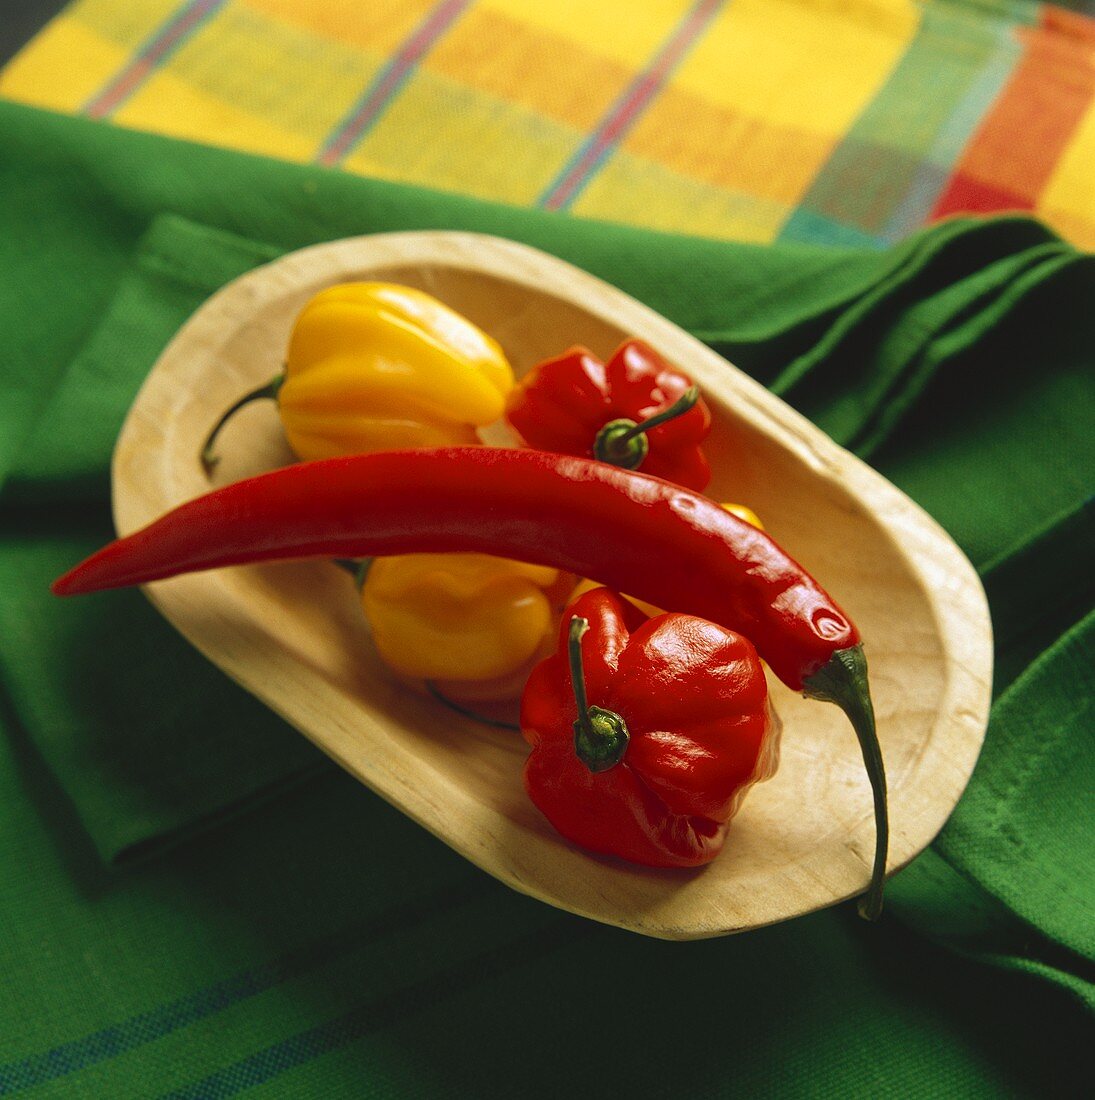 A red chili & 'Chinese lantern' chilies in a wooden bowl